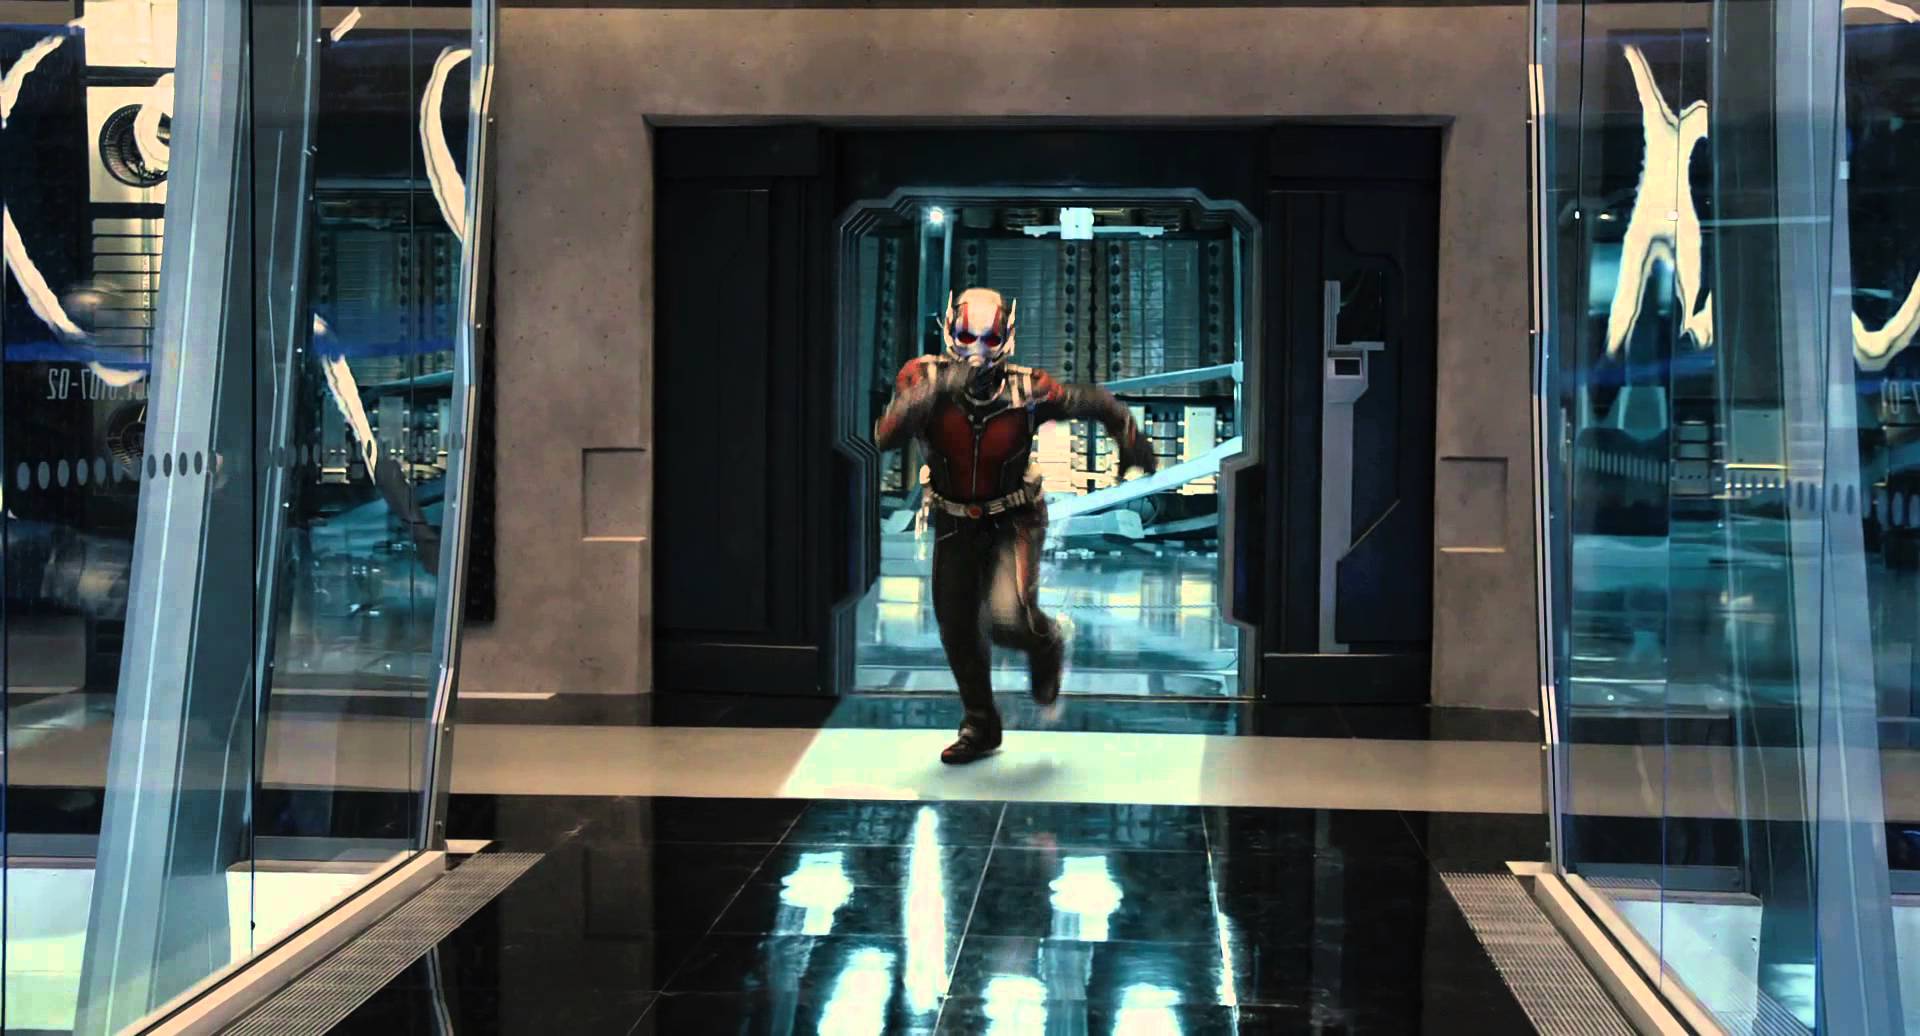 Movie Ant-Man HD Wallpaper | Background Image